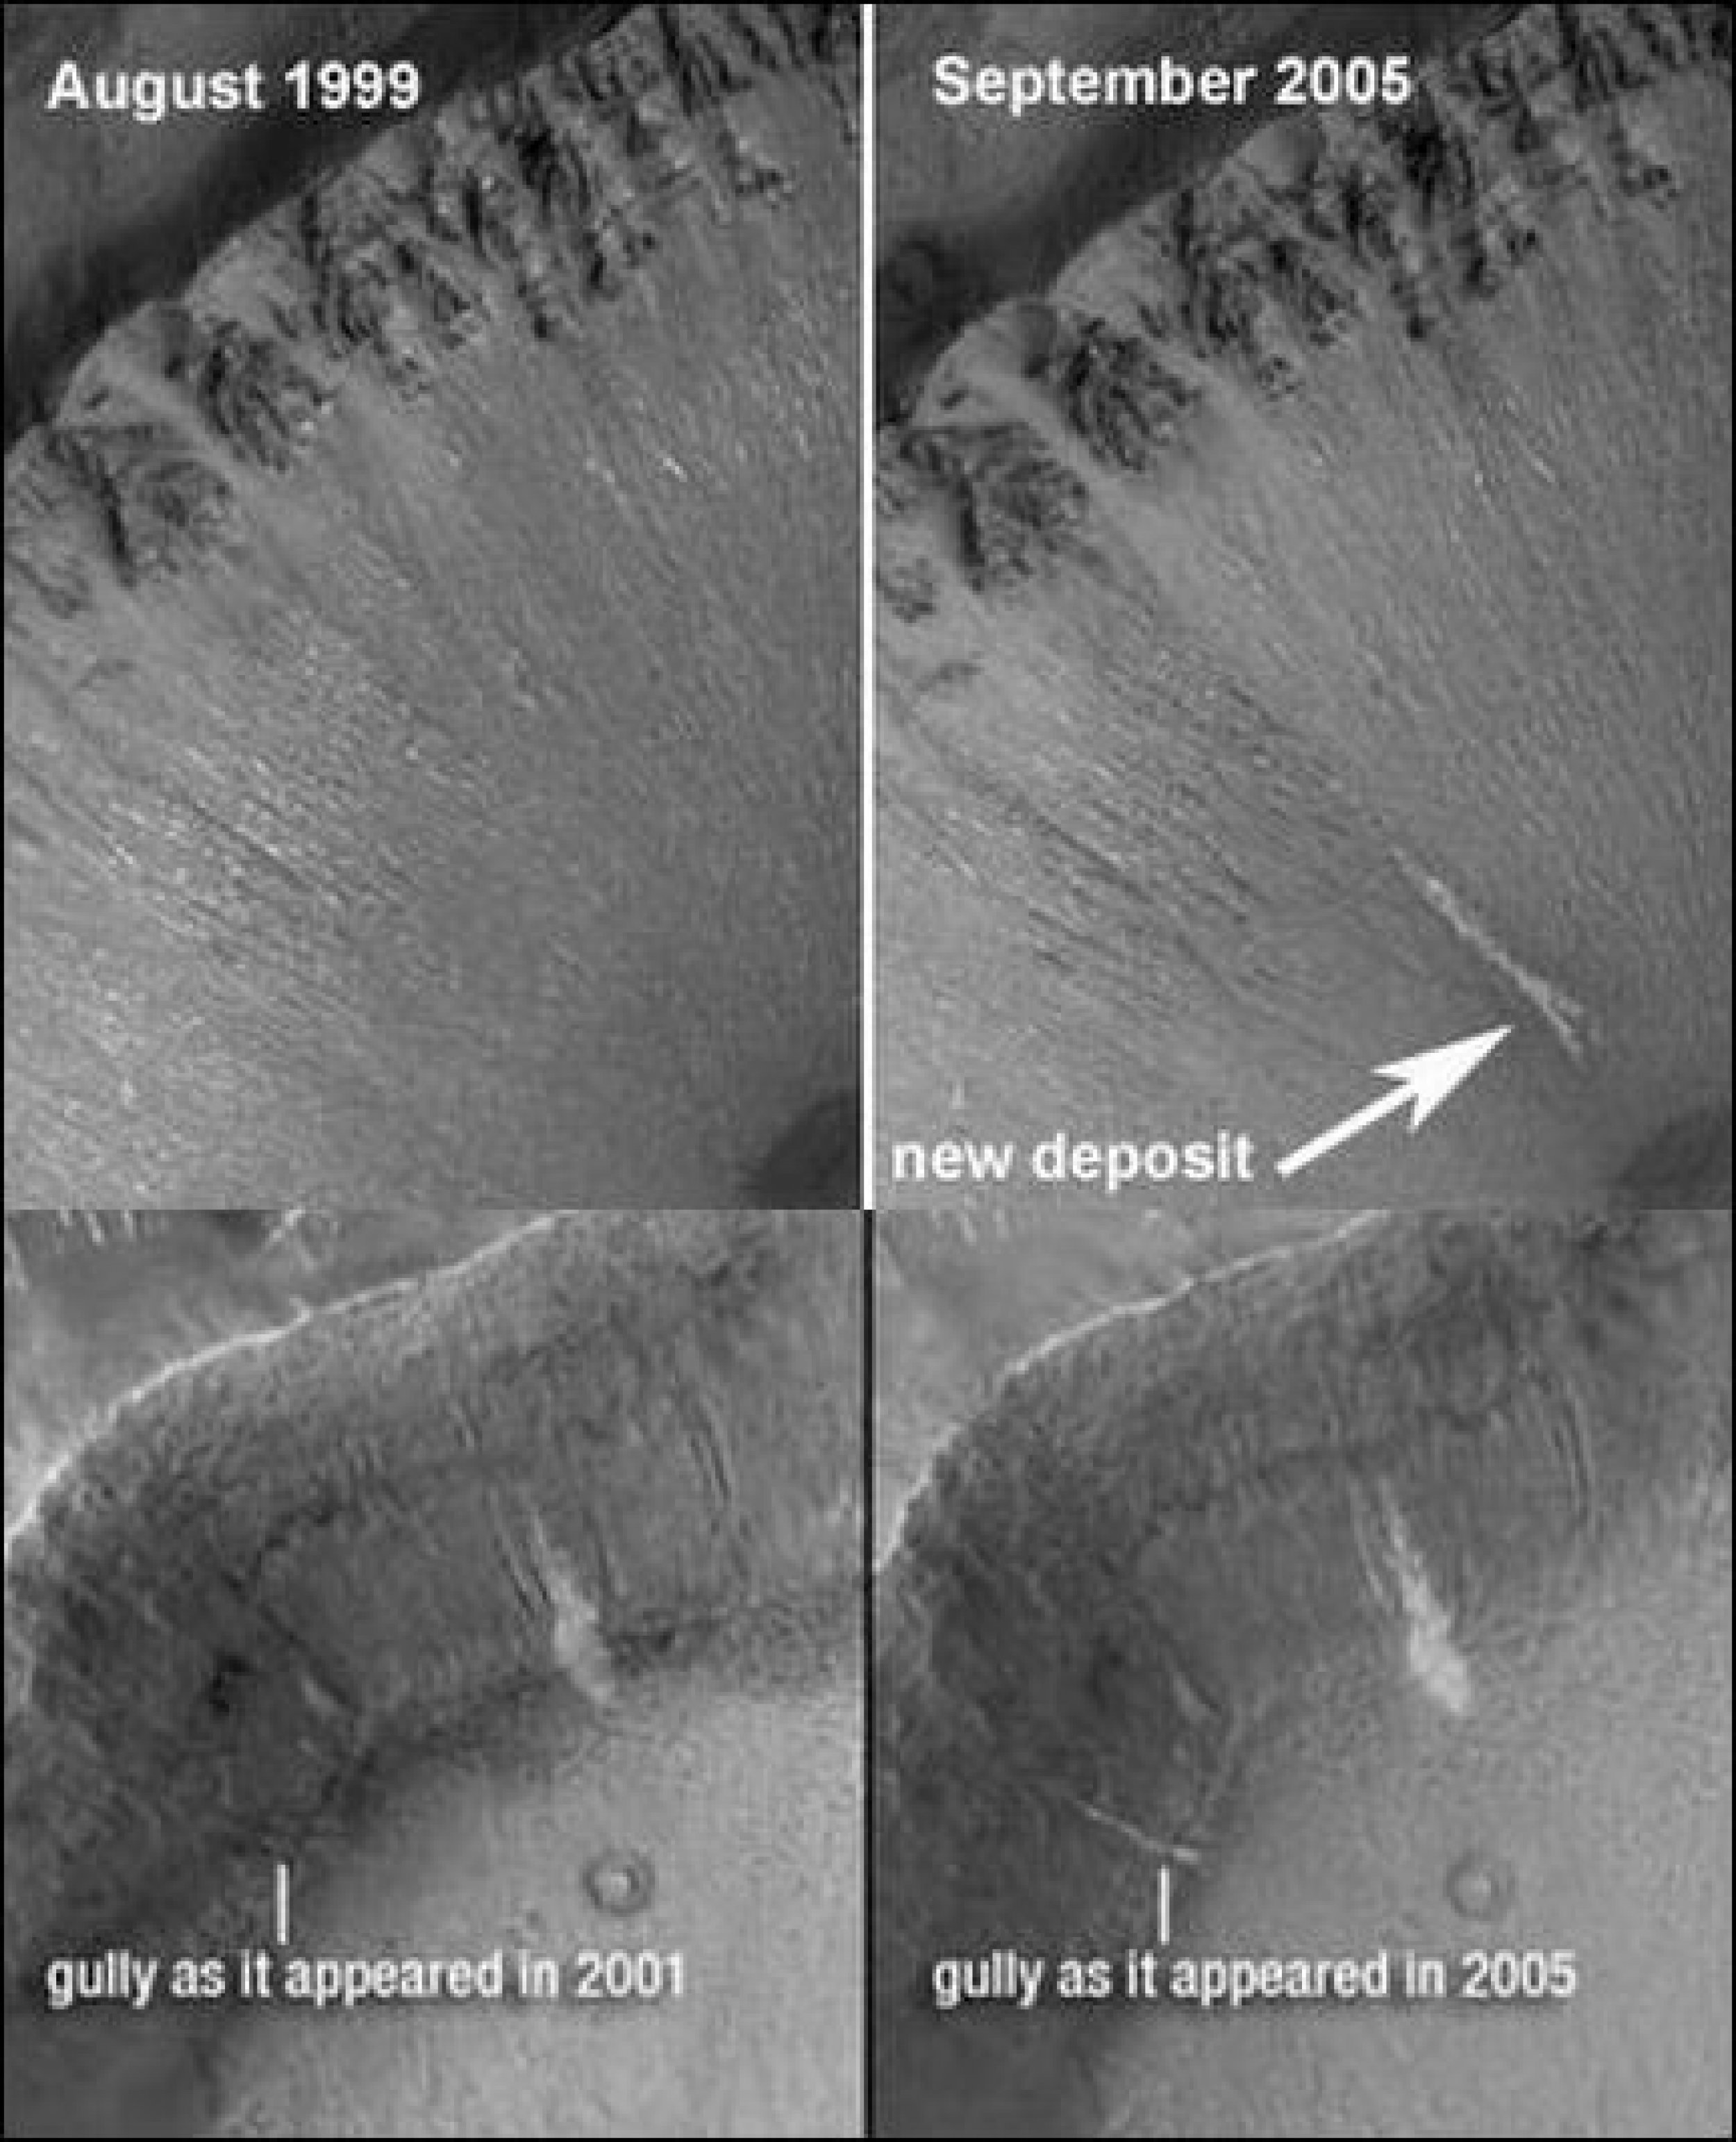 Signs of water on Mars